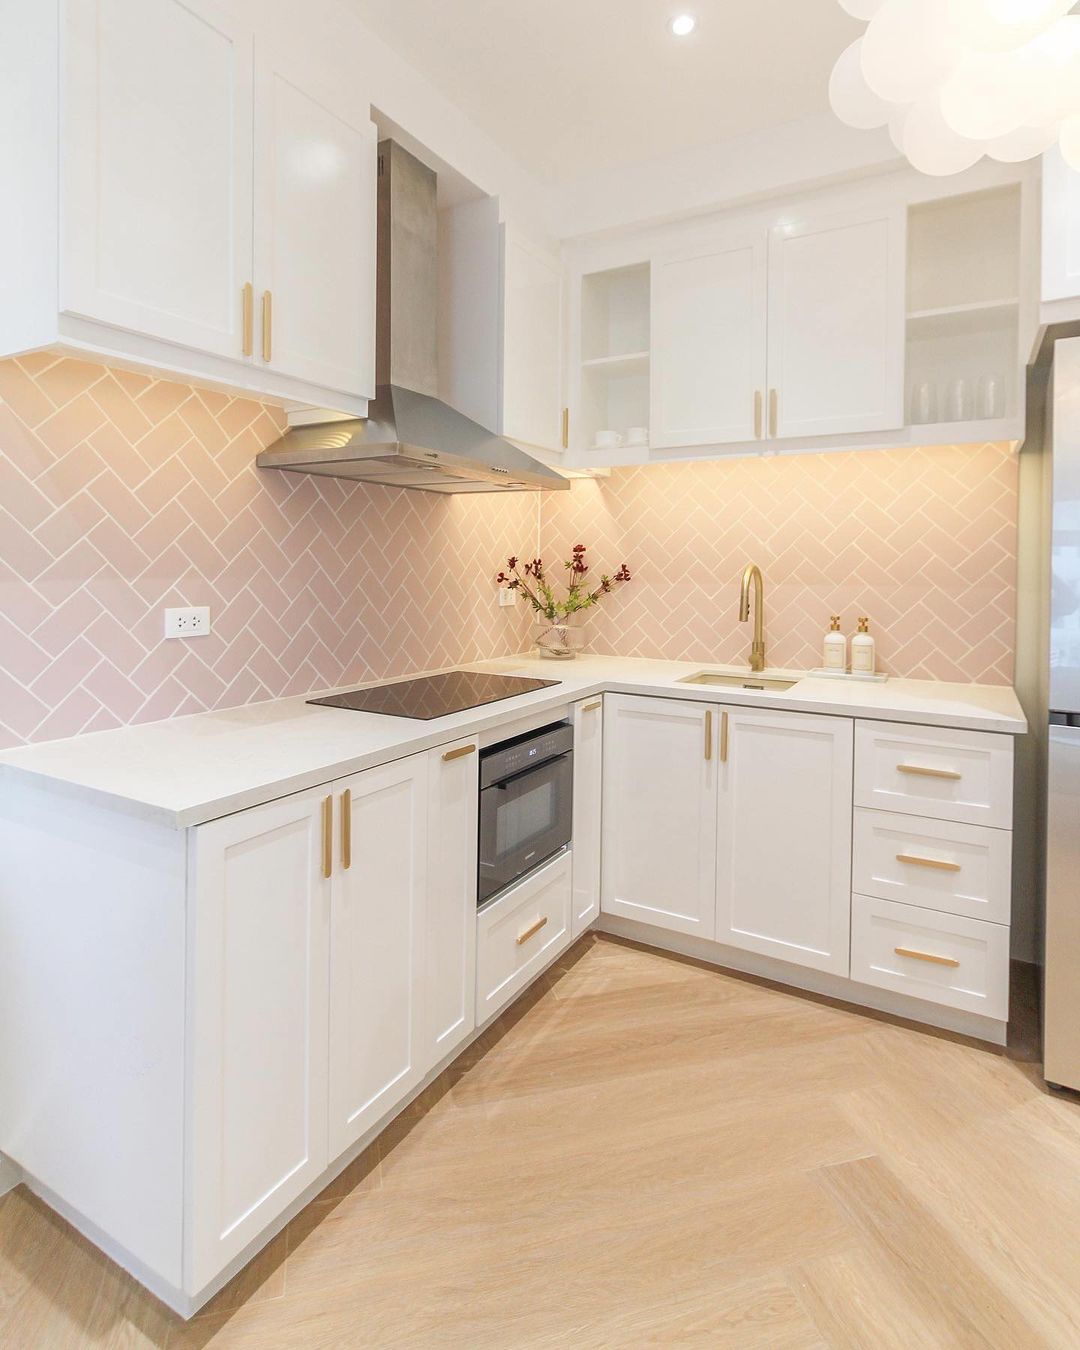 Sleek Elegance: White Shaker Cabinets with Golden Touches